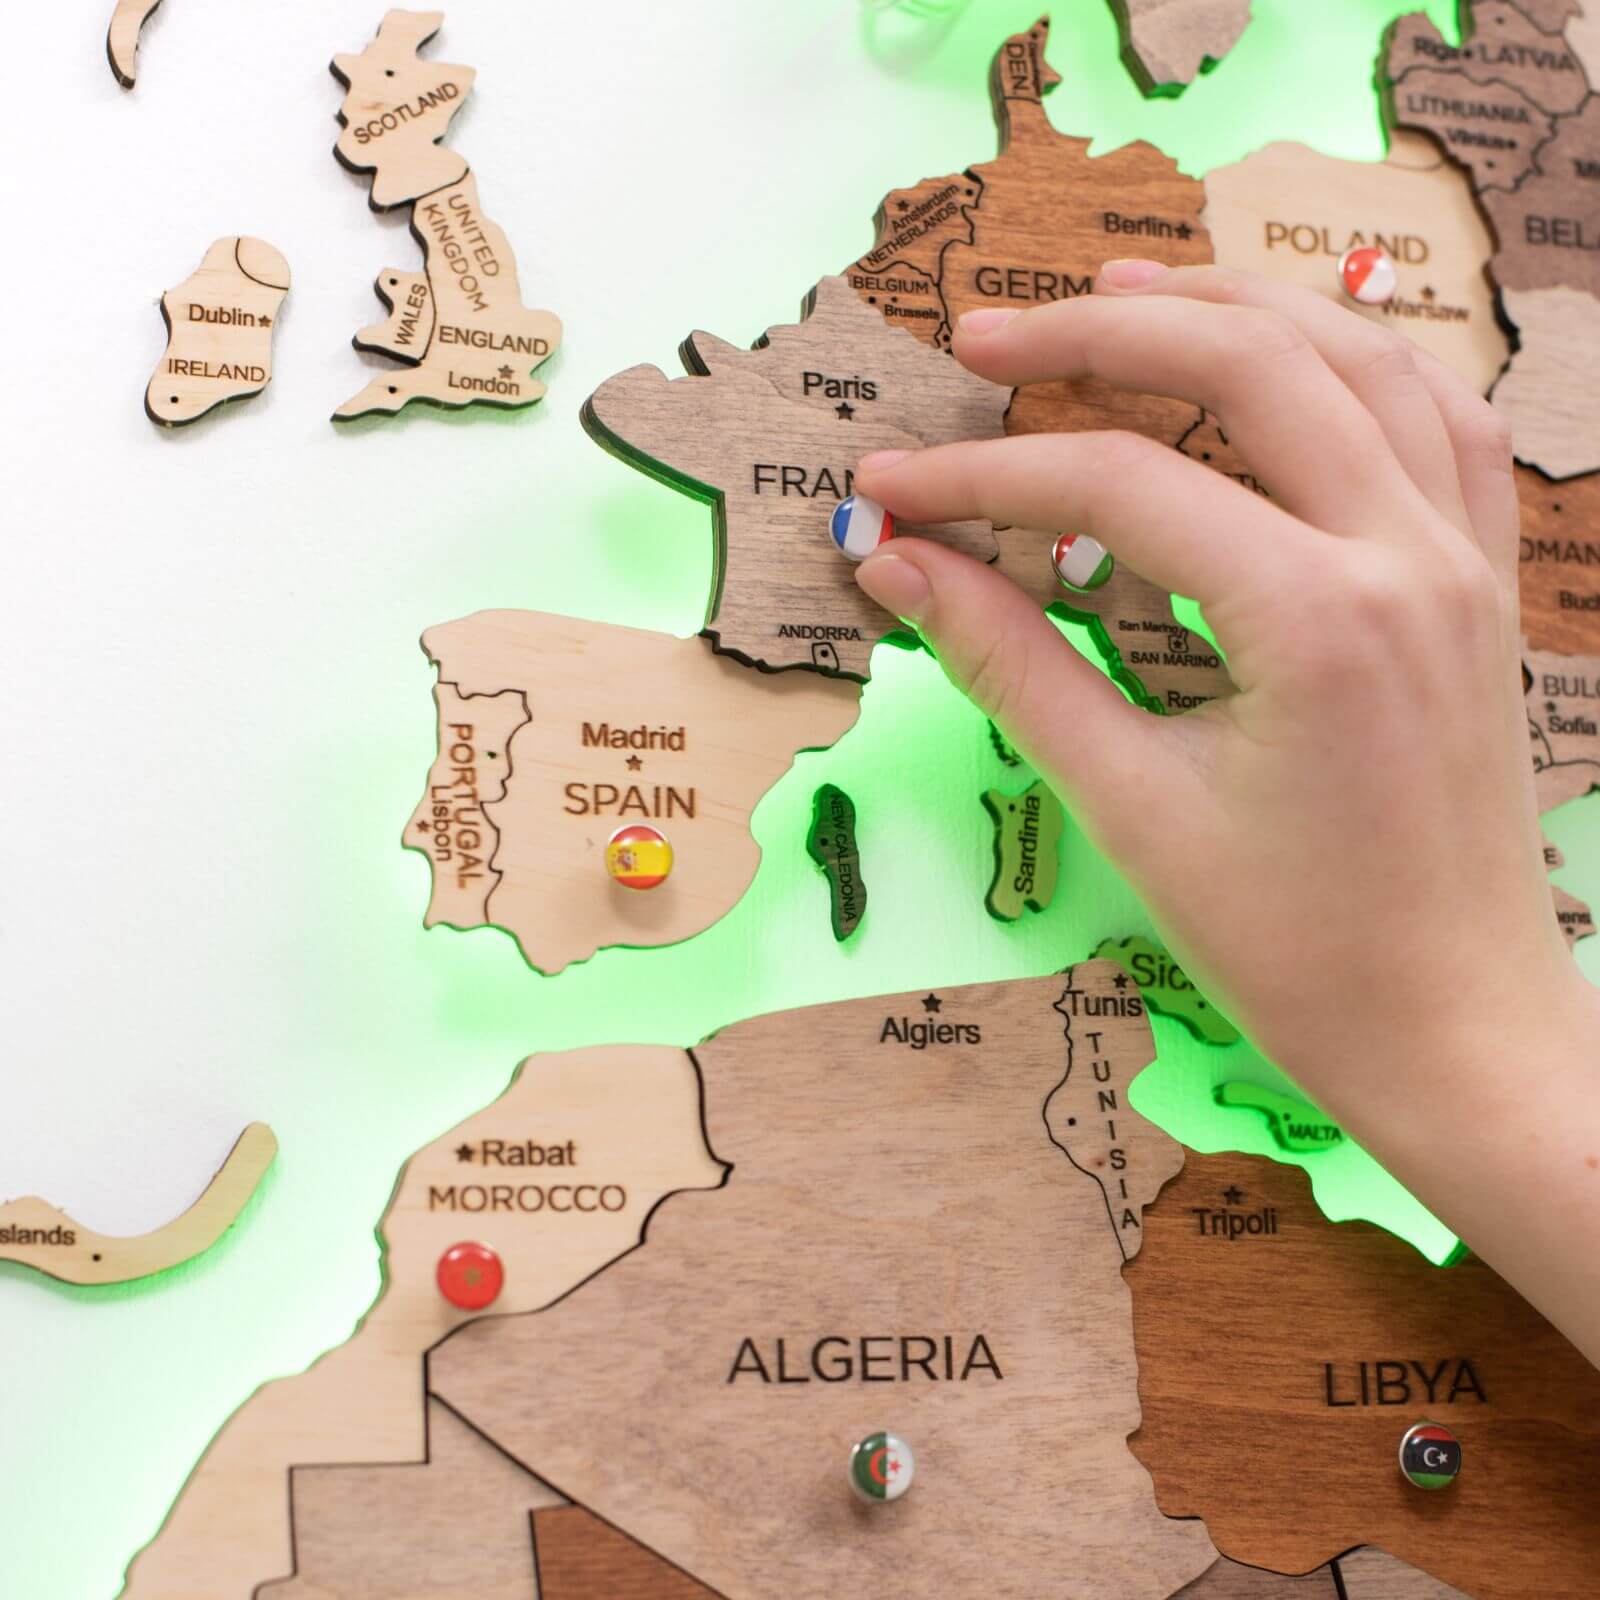 LED Wooden World Map Review